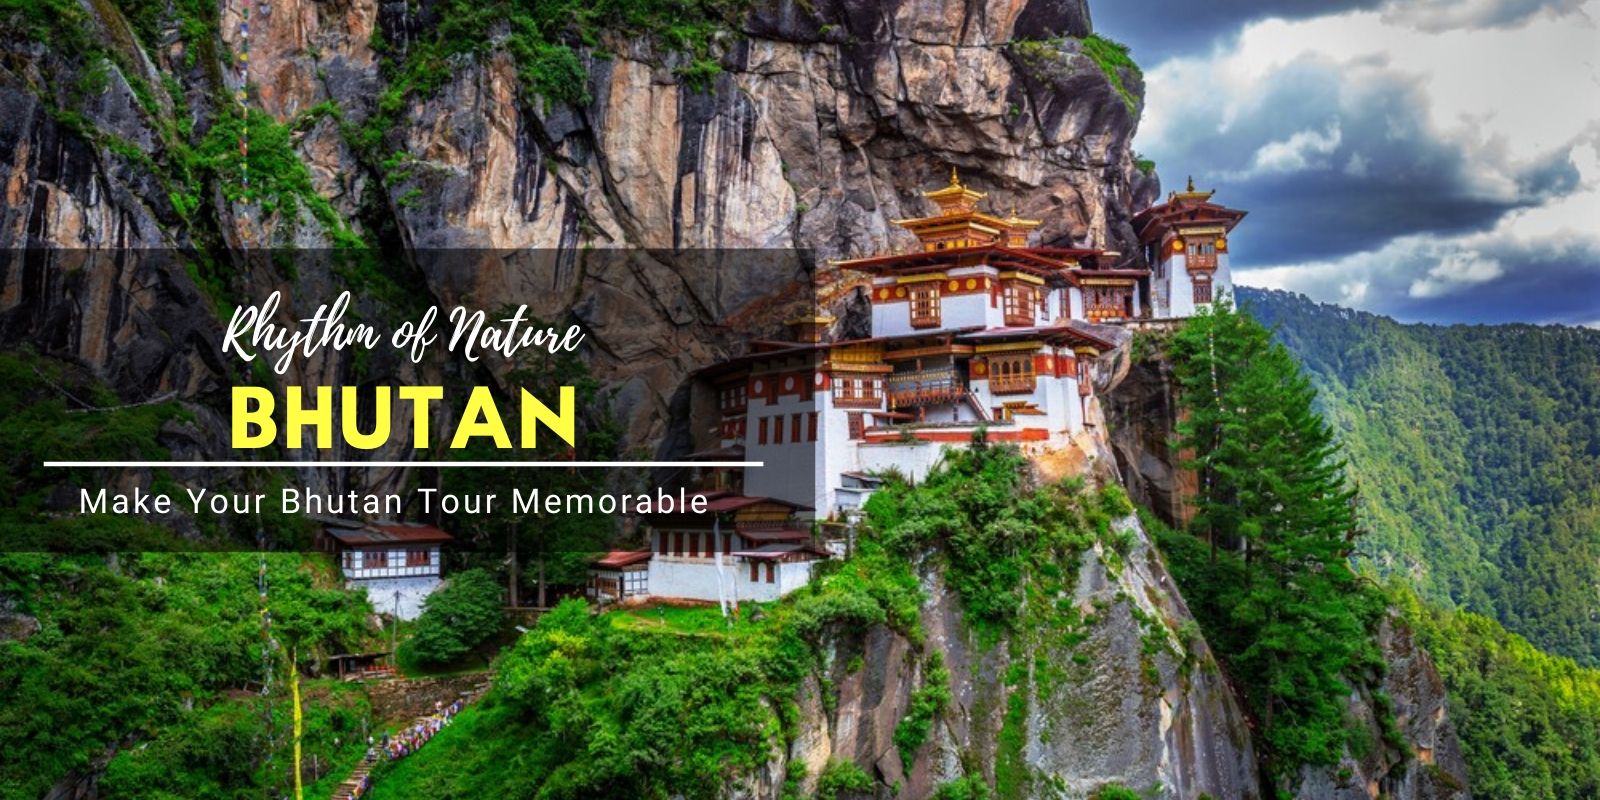 3 Things You Can Do To Make Your Bhutan Tour Memorable